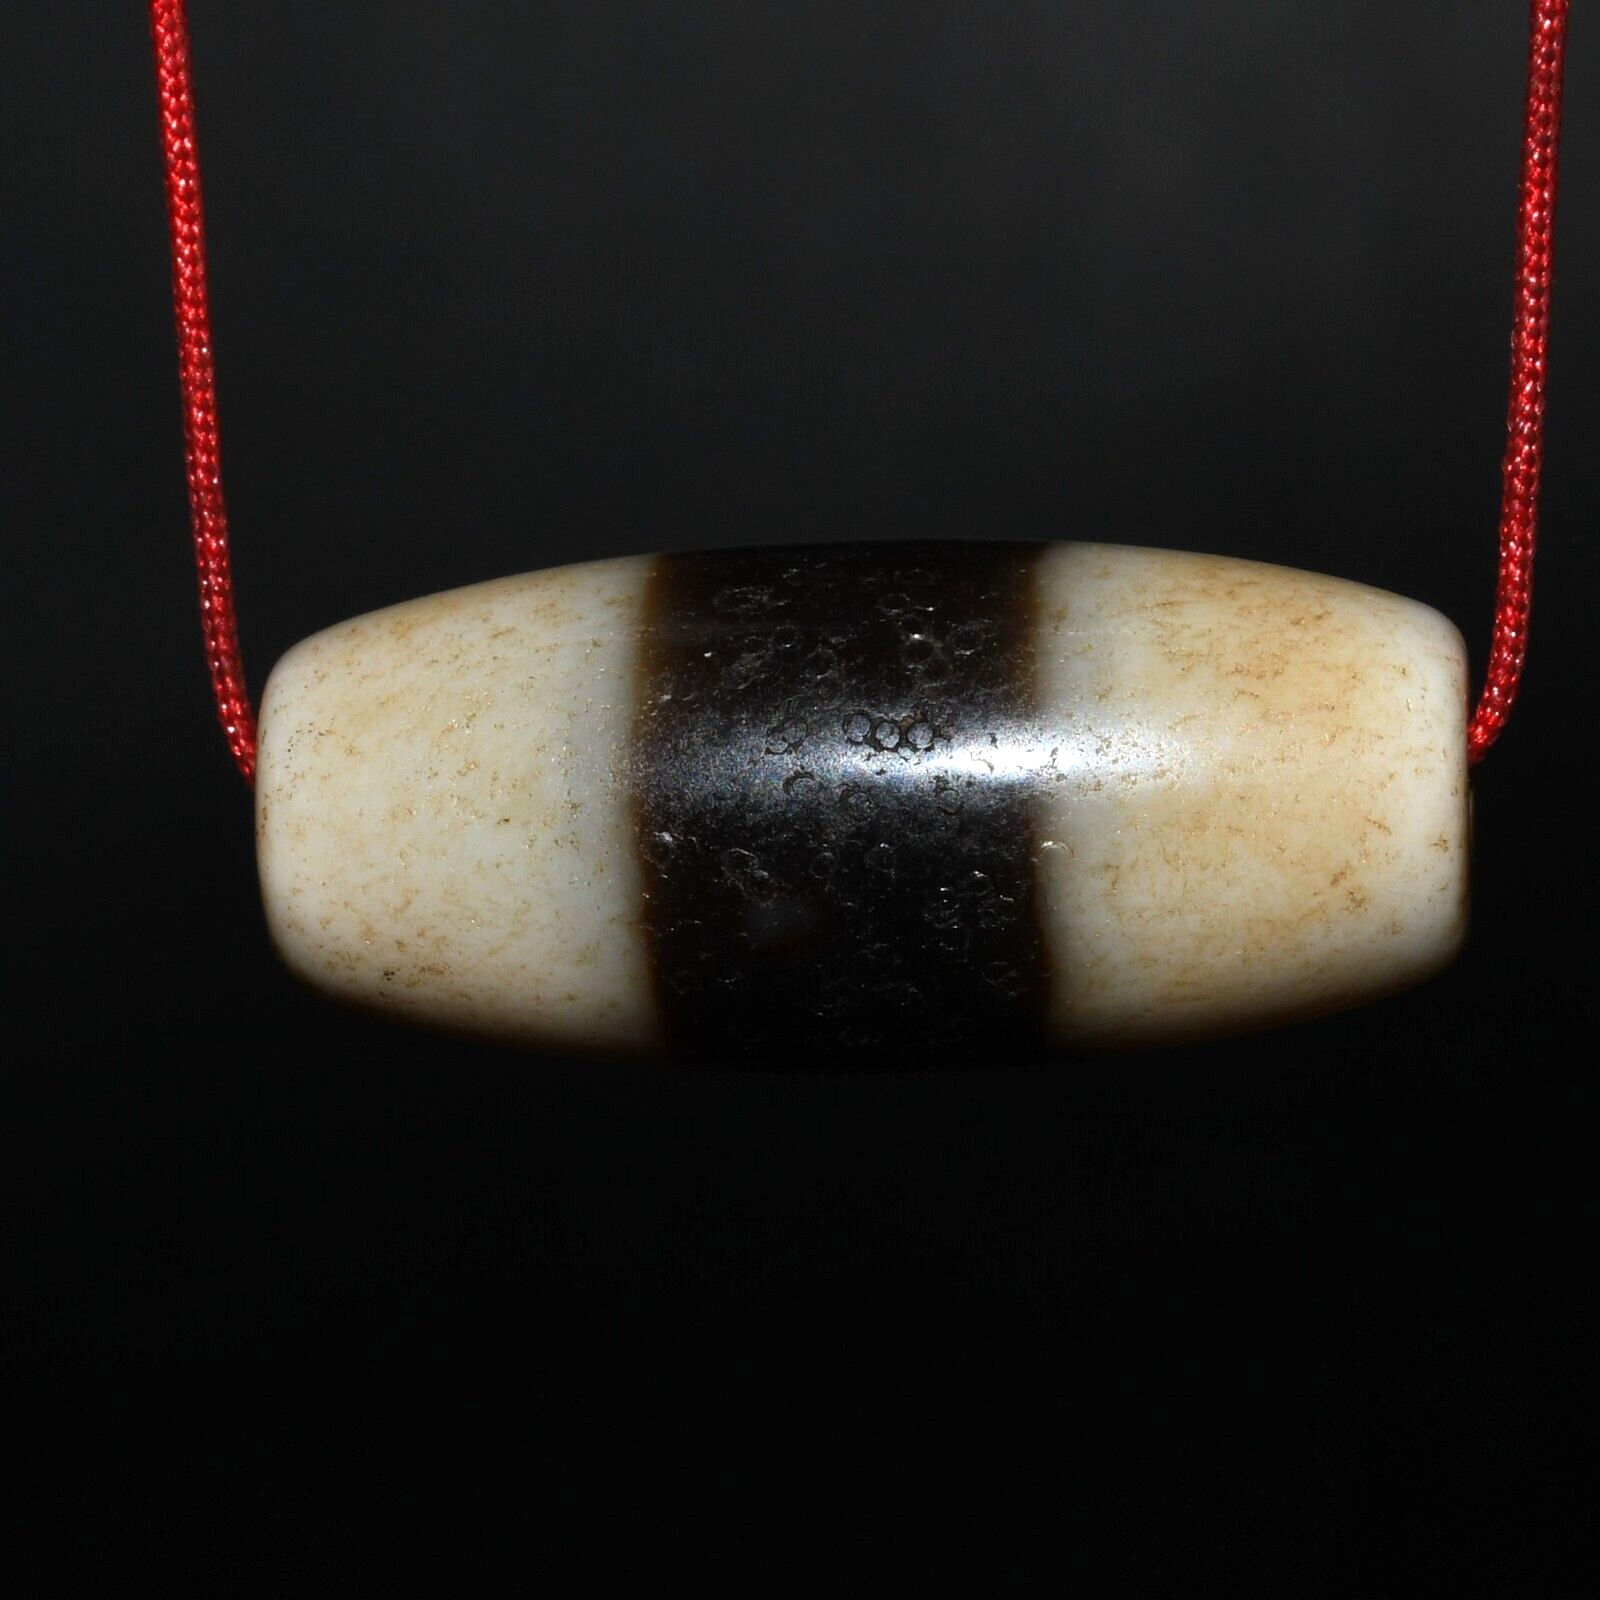 Authentic Ancient Central Asian Chung Dzi Agate Stone Bead with Single Stripe